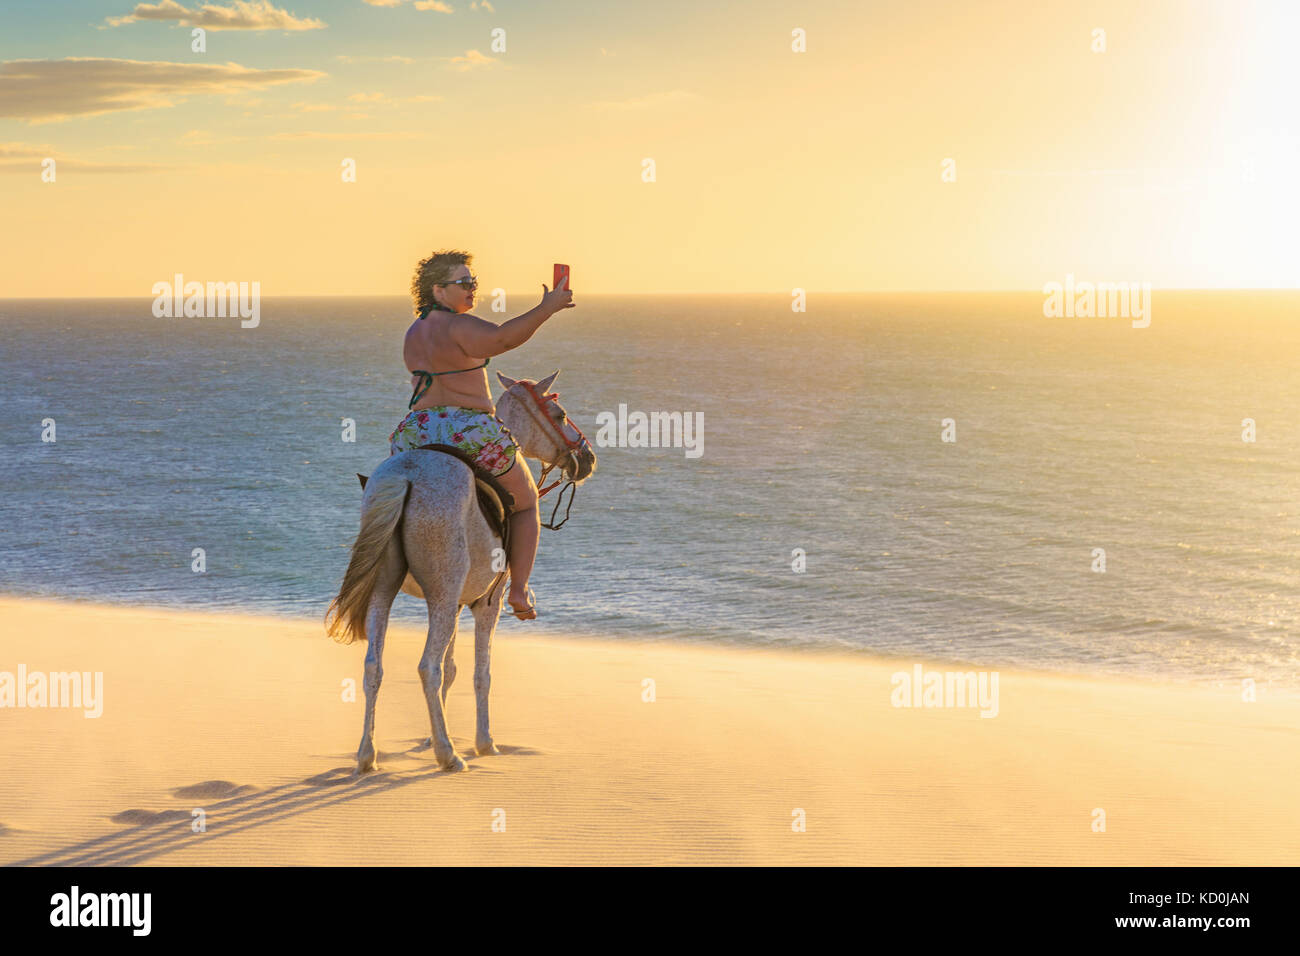 Woman riding horse on beach, taking picture of view using smartphone, Jericoacoara, Ceara, Brazil, South America Stock Photo